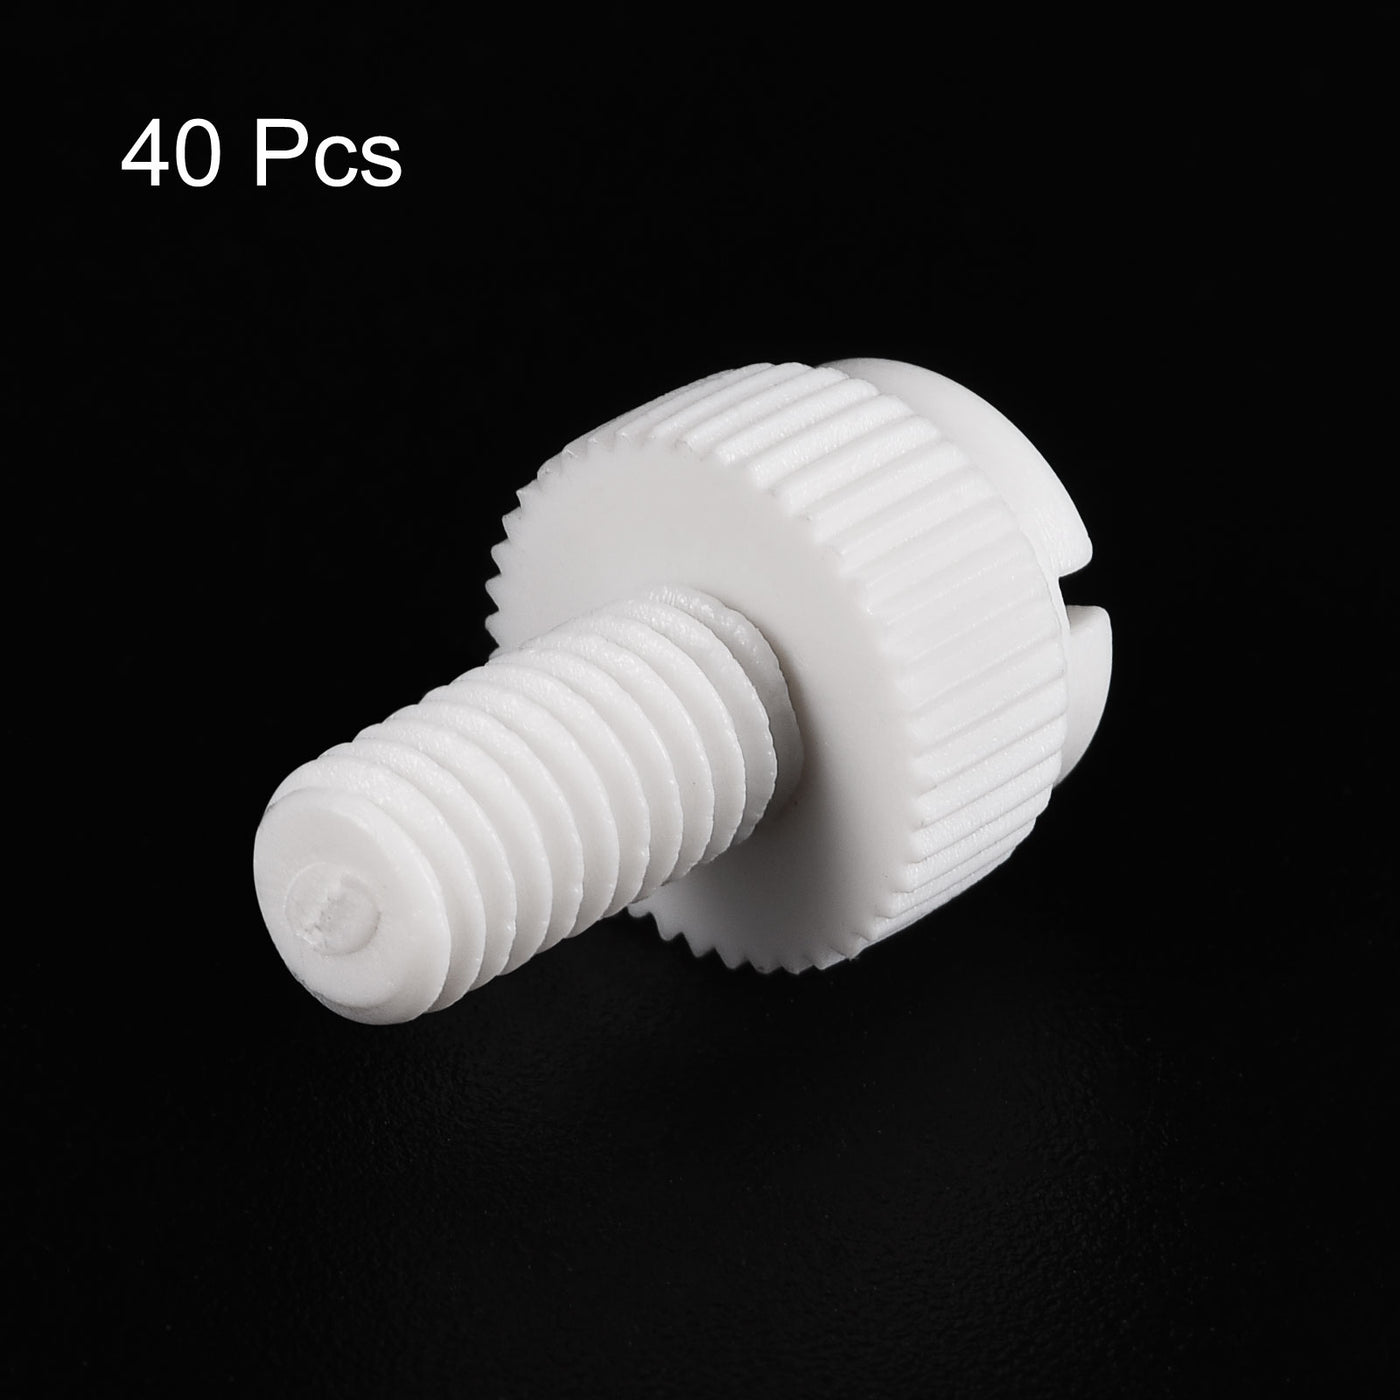 Uxcell Uxcell Plastic Machine Screws, M8x16mm PP Slotted Knurled Fasteners Bolts for Electronics, Communications, White, 40Pcs